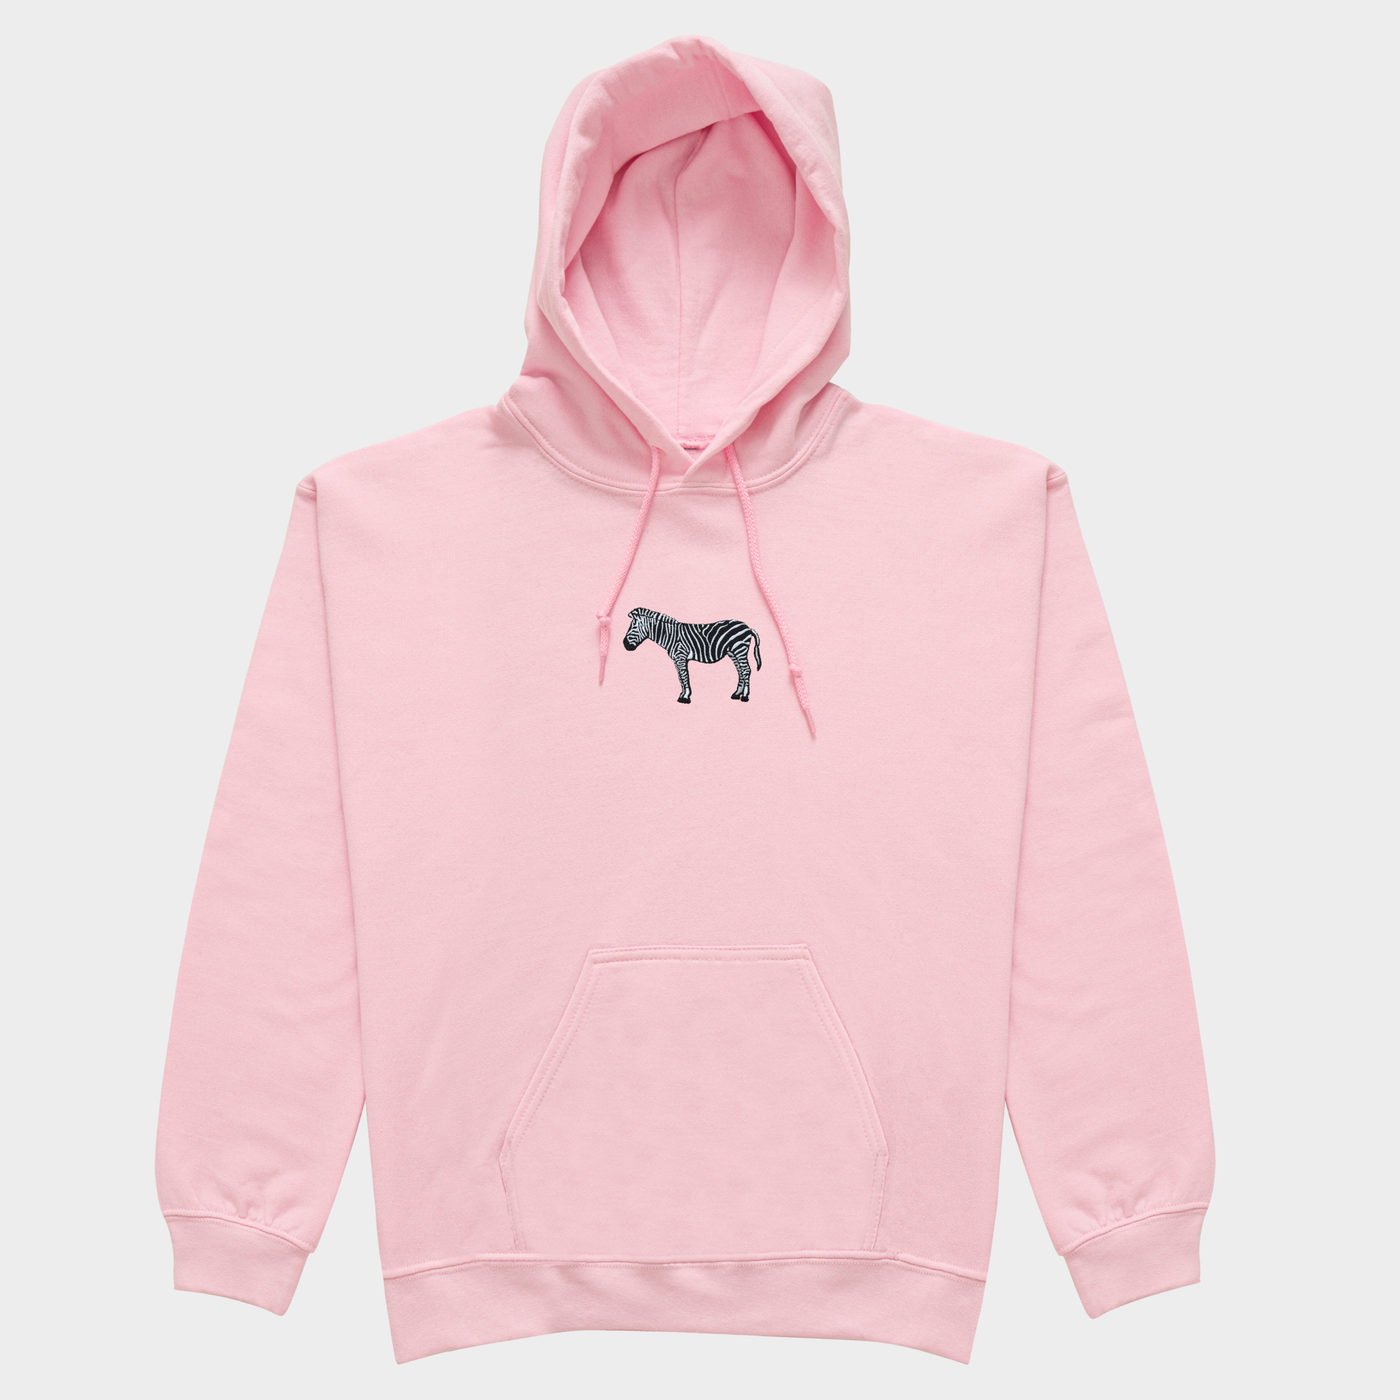 Bobby's Planet Women's Embroidered Zebra Hoodie from African Animals Collection in Light Pink Color#color_light-pink